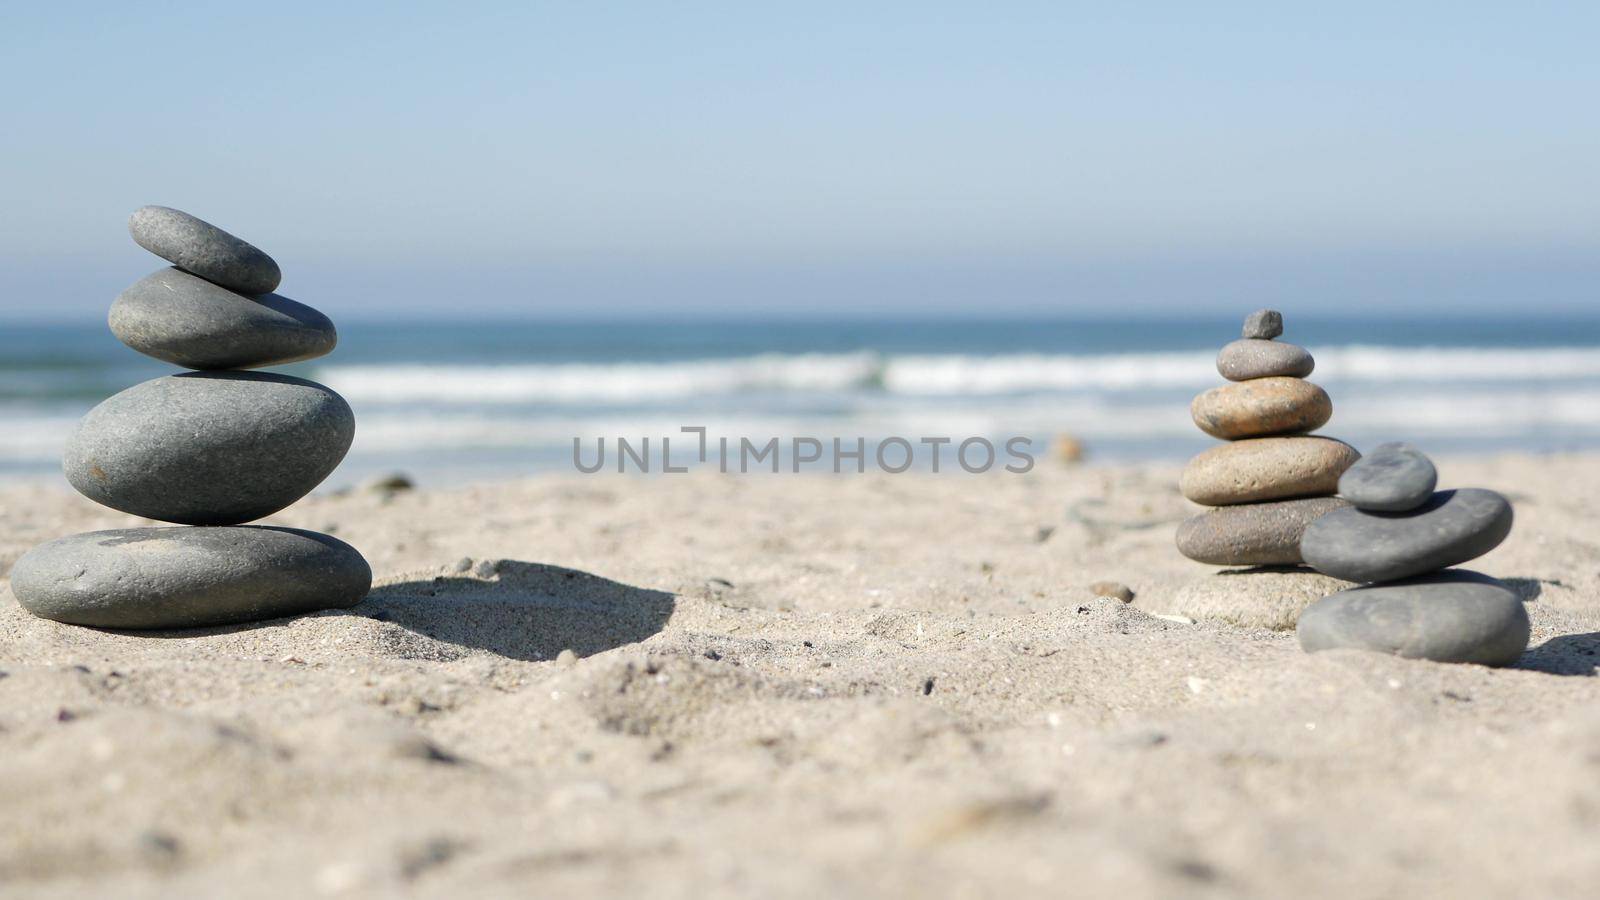 Rock balancing on ocean beach, stones stacking by sea water waves. Pyramid of pebbles on sandy shore by DogoraSun